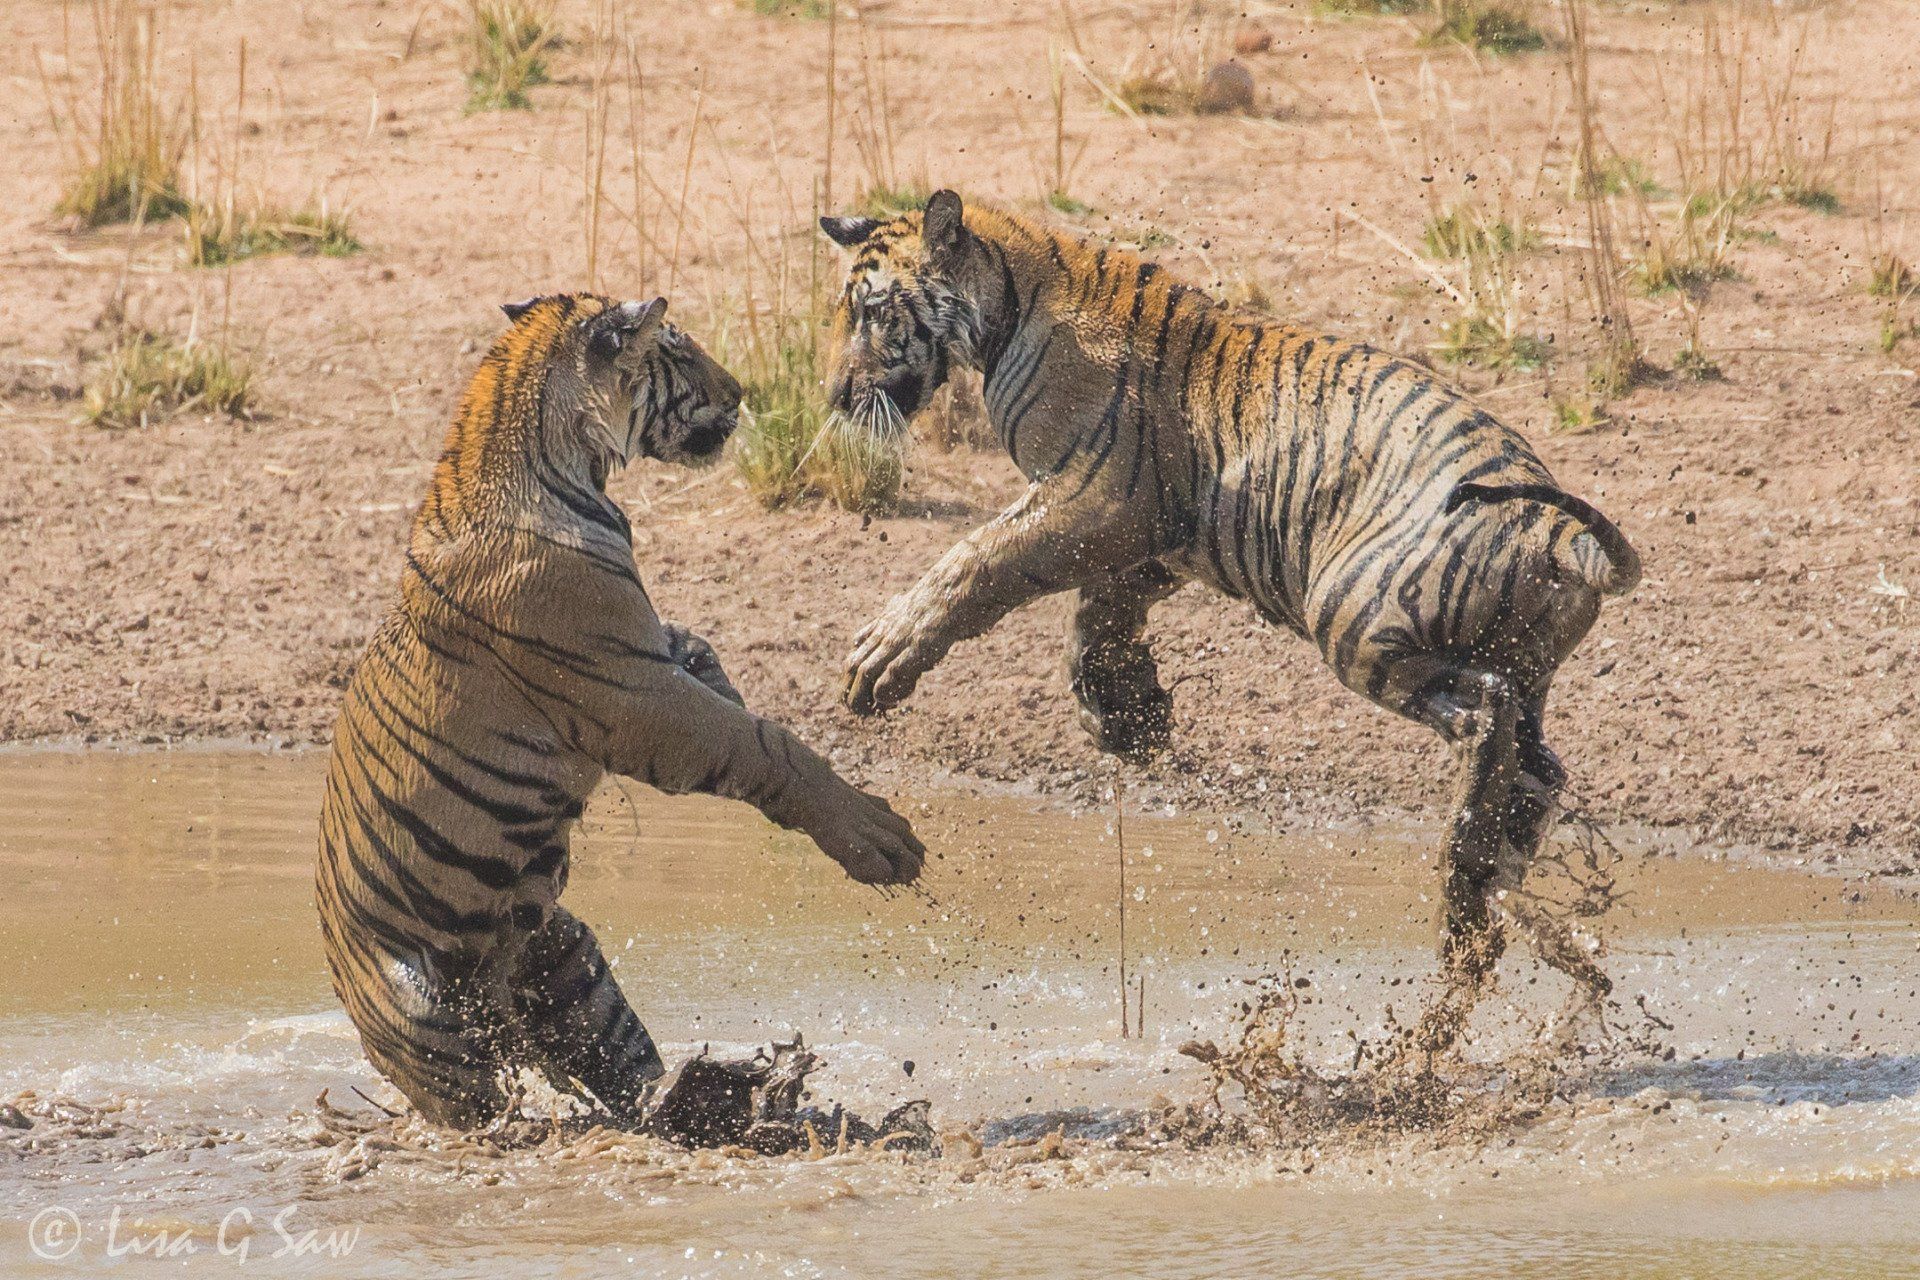 Two tigers play fighting in water